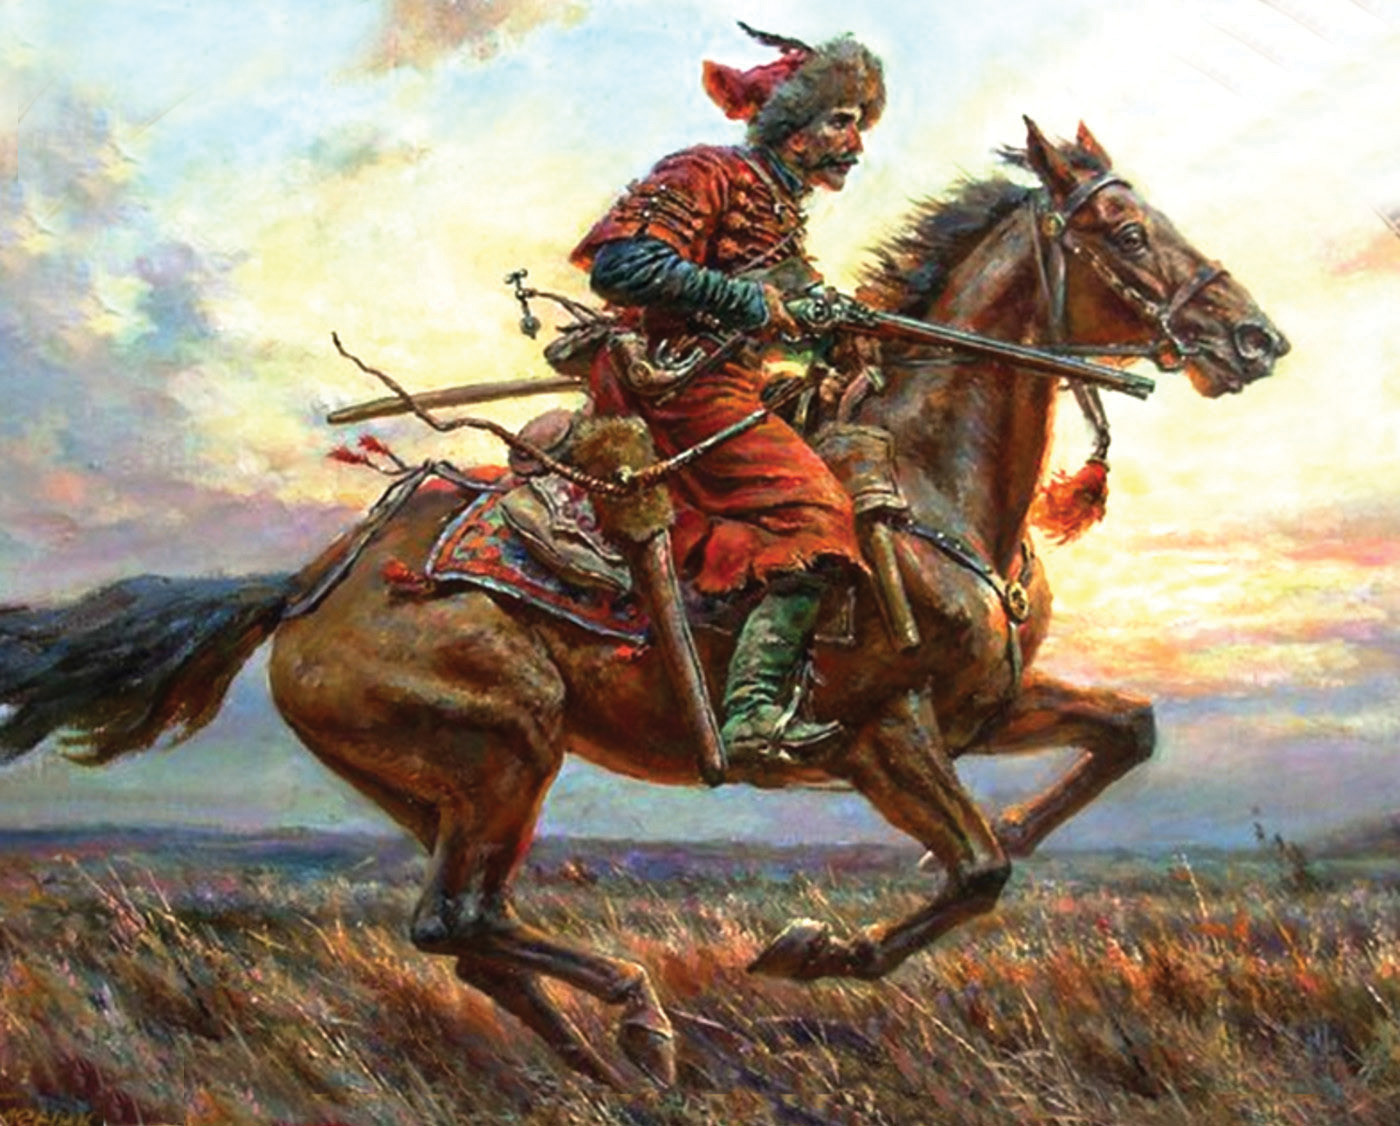 Cossacks, who were expert horsemen armed with sabre and lance, waged many undeclared wars against Tatar foes in Europe and Asia. 